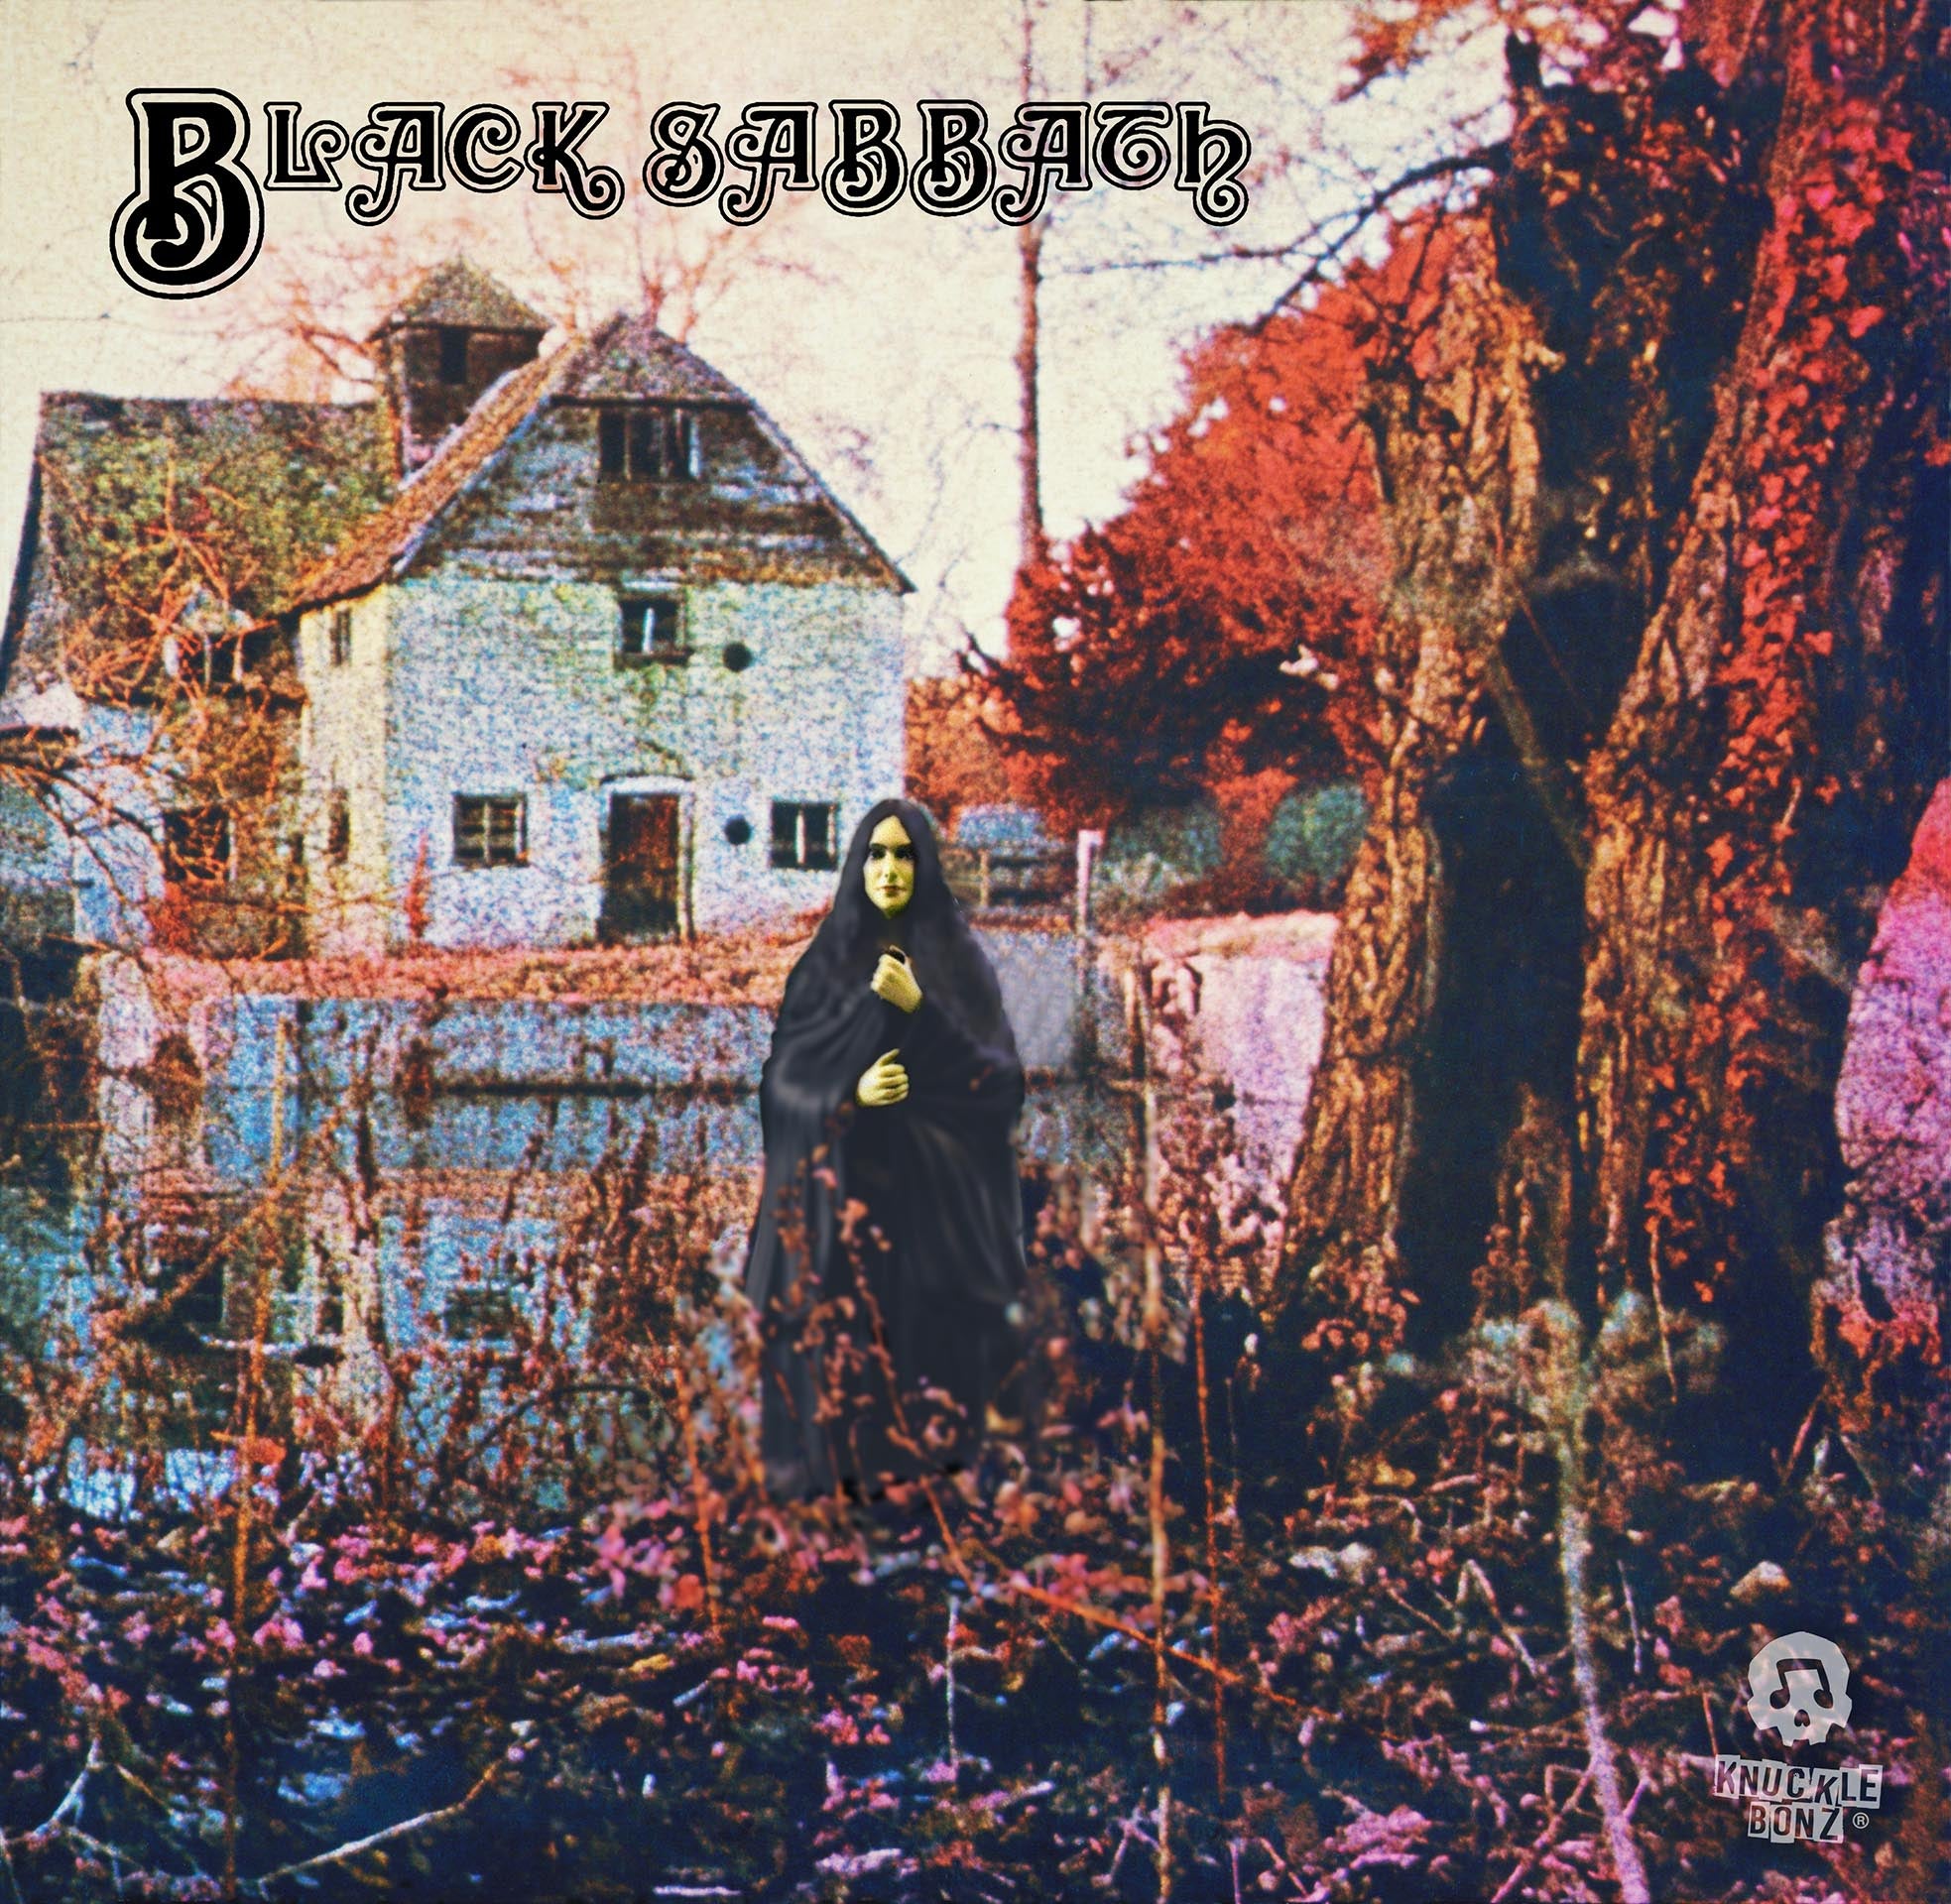 53 Years Ago, Black Sabbath Changed Us Forever with Their Debut Album